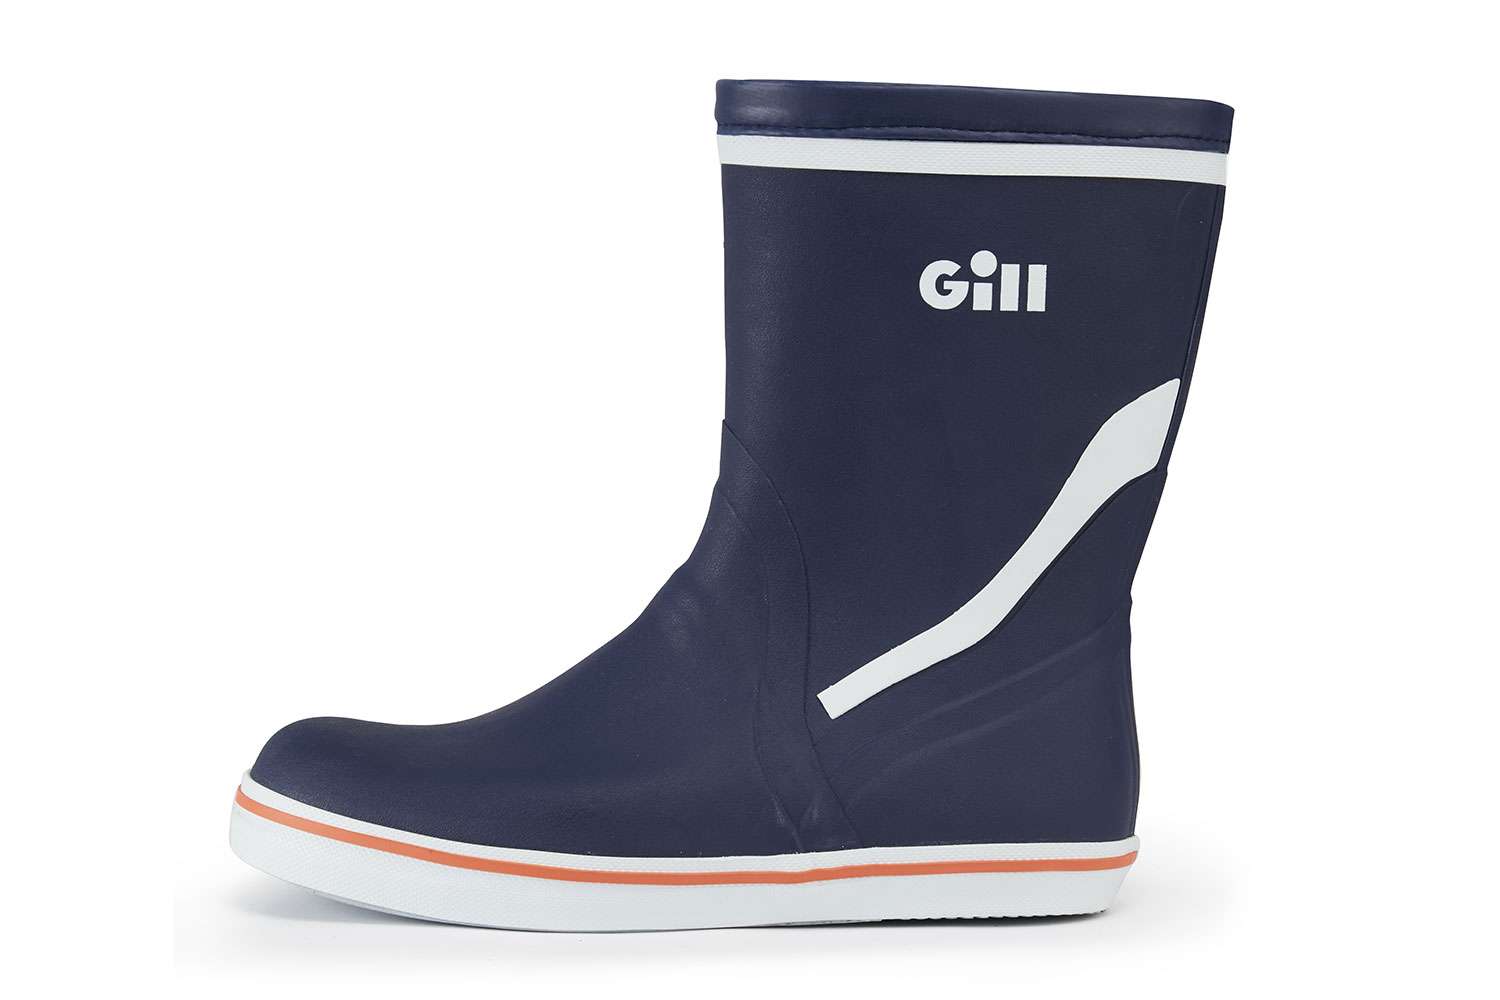  <B> Gill Short Cruising Boot</B>
<BR>When the conditions on the water get tough, you need a boot thatâs there for you. Thatâs precisely why Gill created the new flagship Short Cruising Boot â for the harshest conditions in fishing. With a non-slip, non-marking razor cut outer sole and quick-dry polyester lining; this short boot will keep your feet dry all day long. For those extra wet conditions the inner sole can be easily removed for faster drying between tours. This is the ideal boot for all activities on and off the water. 
<BR>
<b>MSRP: $75 </b>
<BR>
<a href=